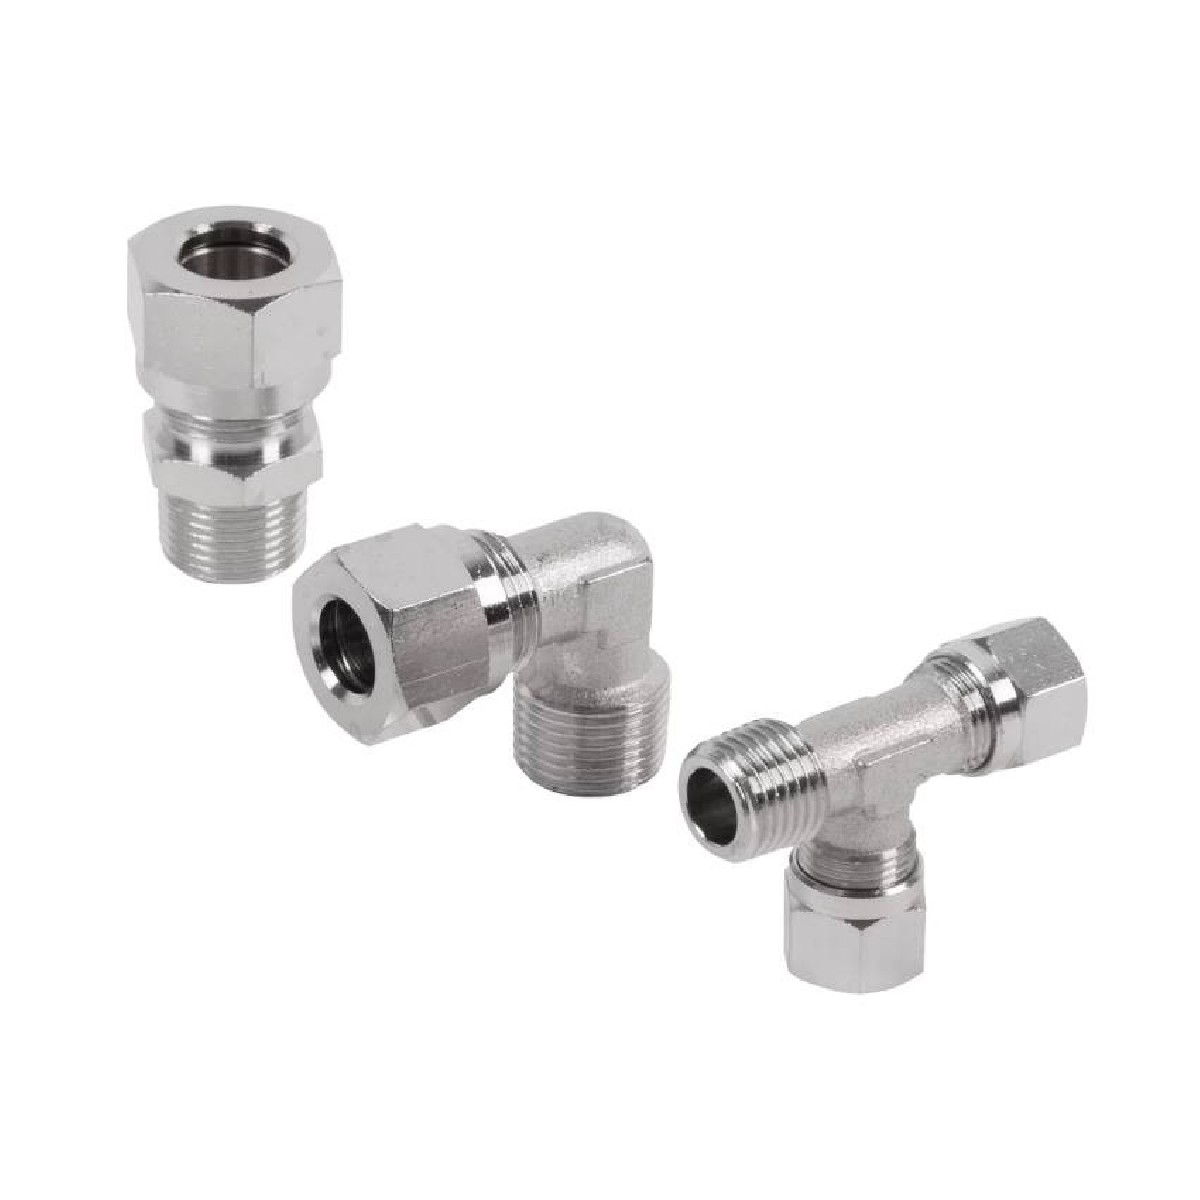 Compression fittings for liquids and gasses